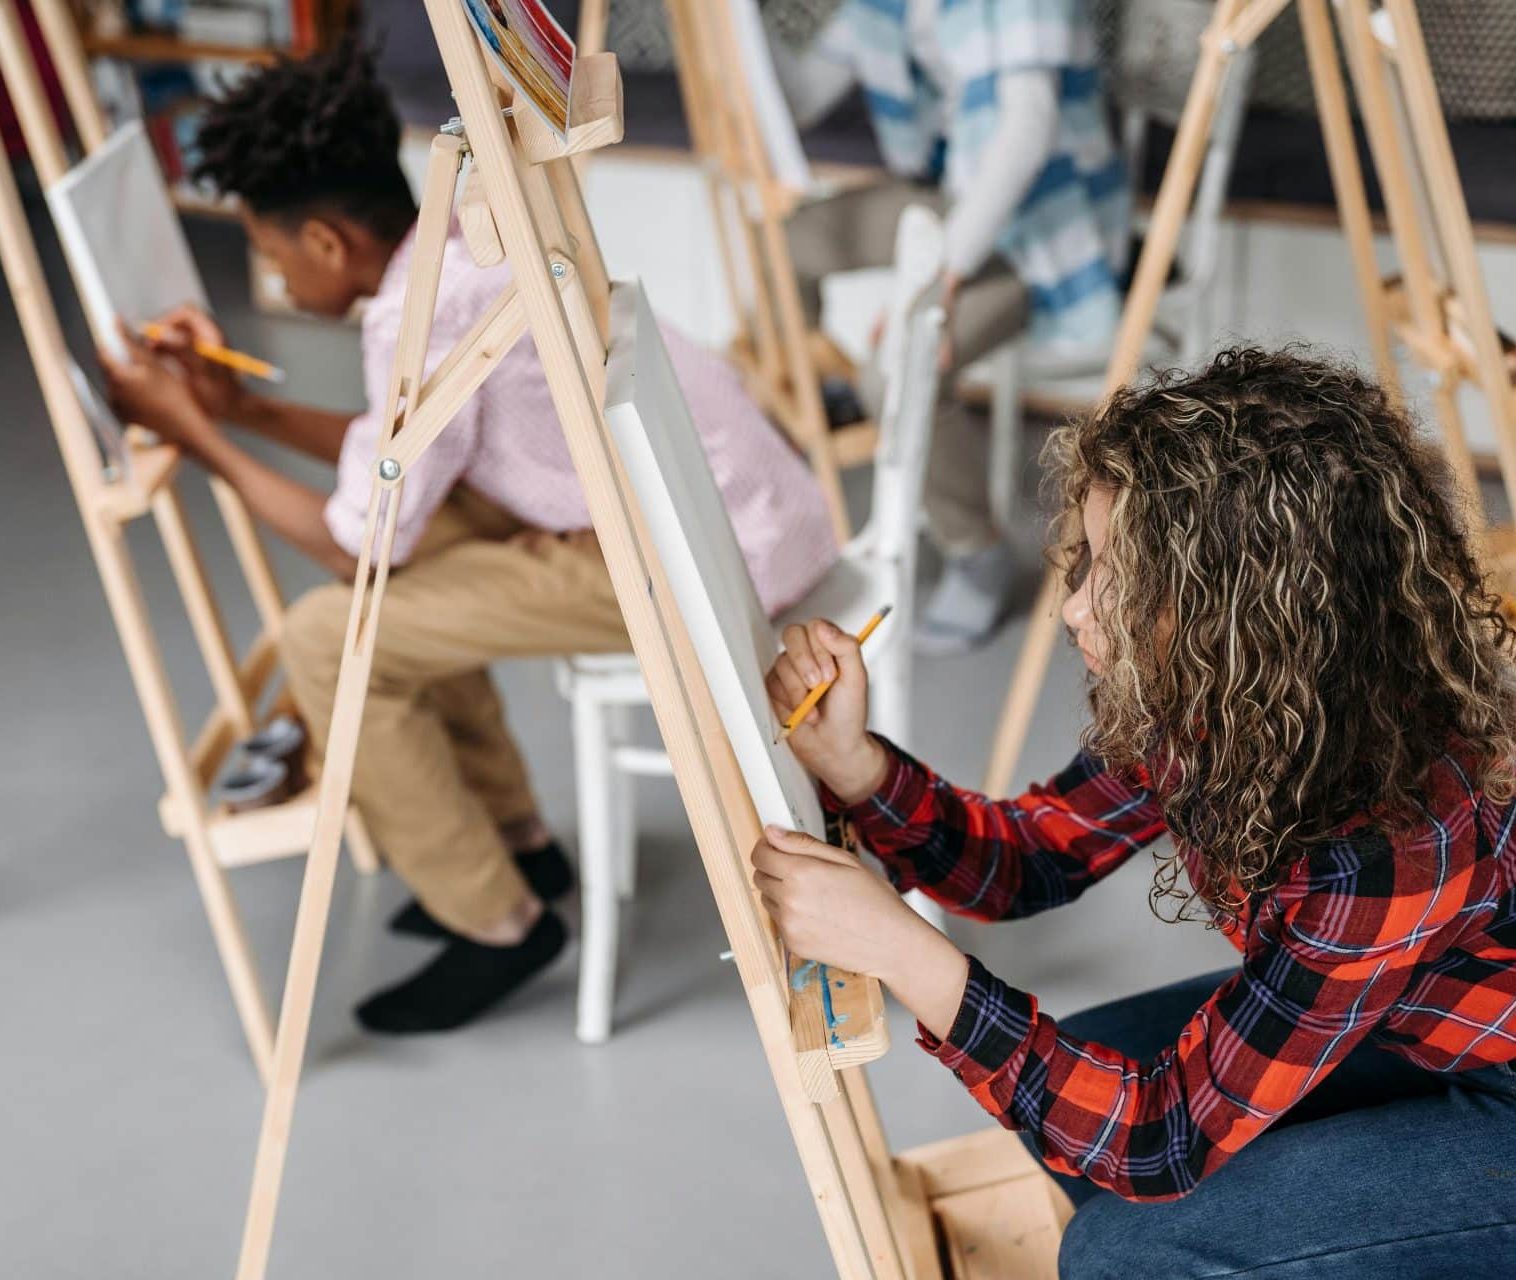 learners in a classroom drawing on easels